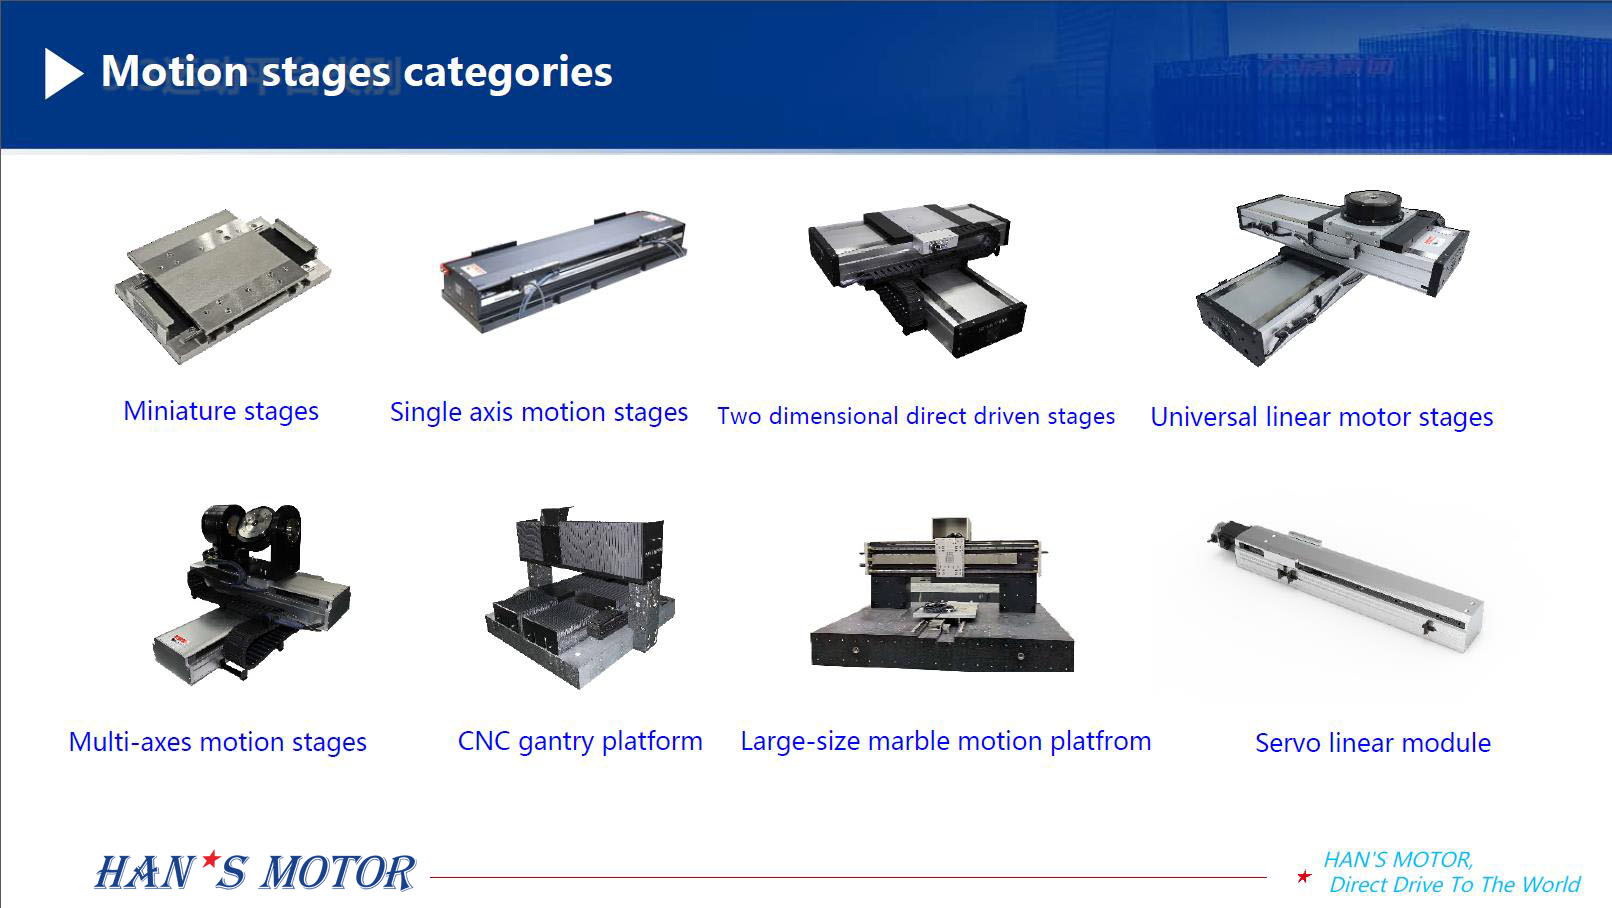 HAN'S MOTOR high dynamics linear motor stages